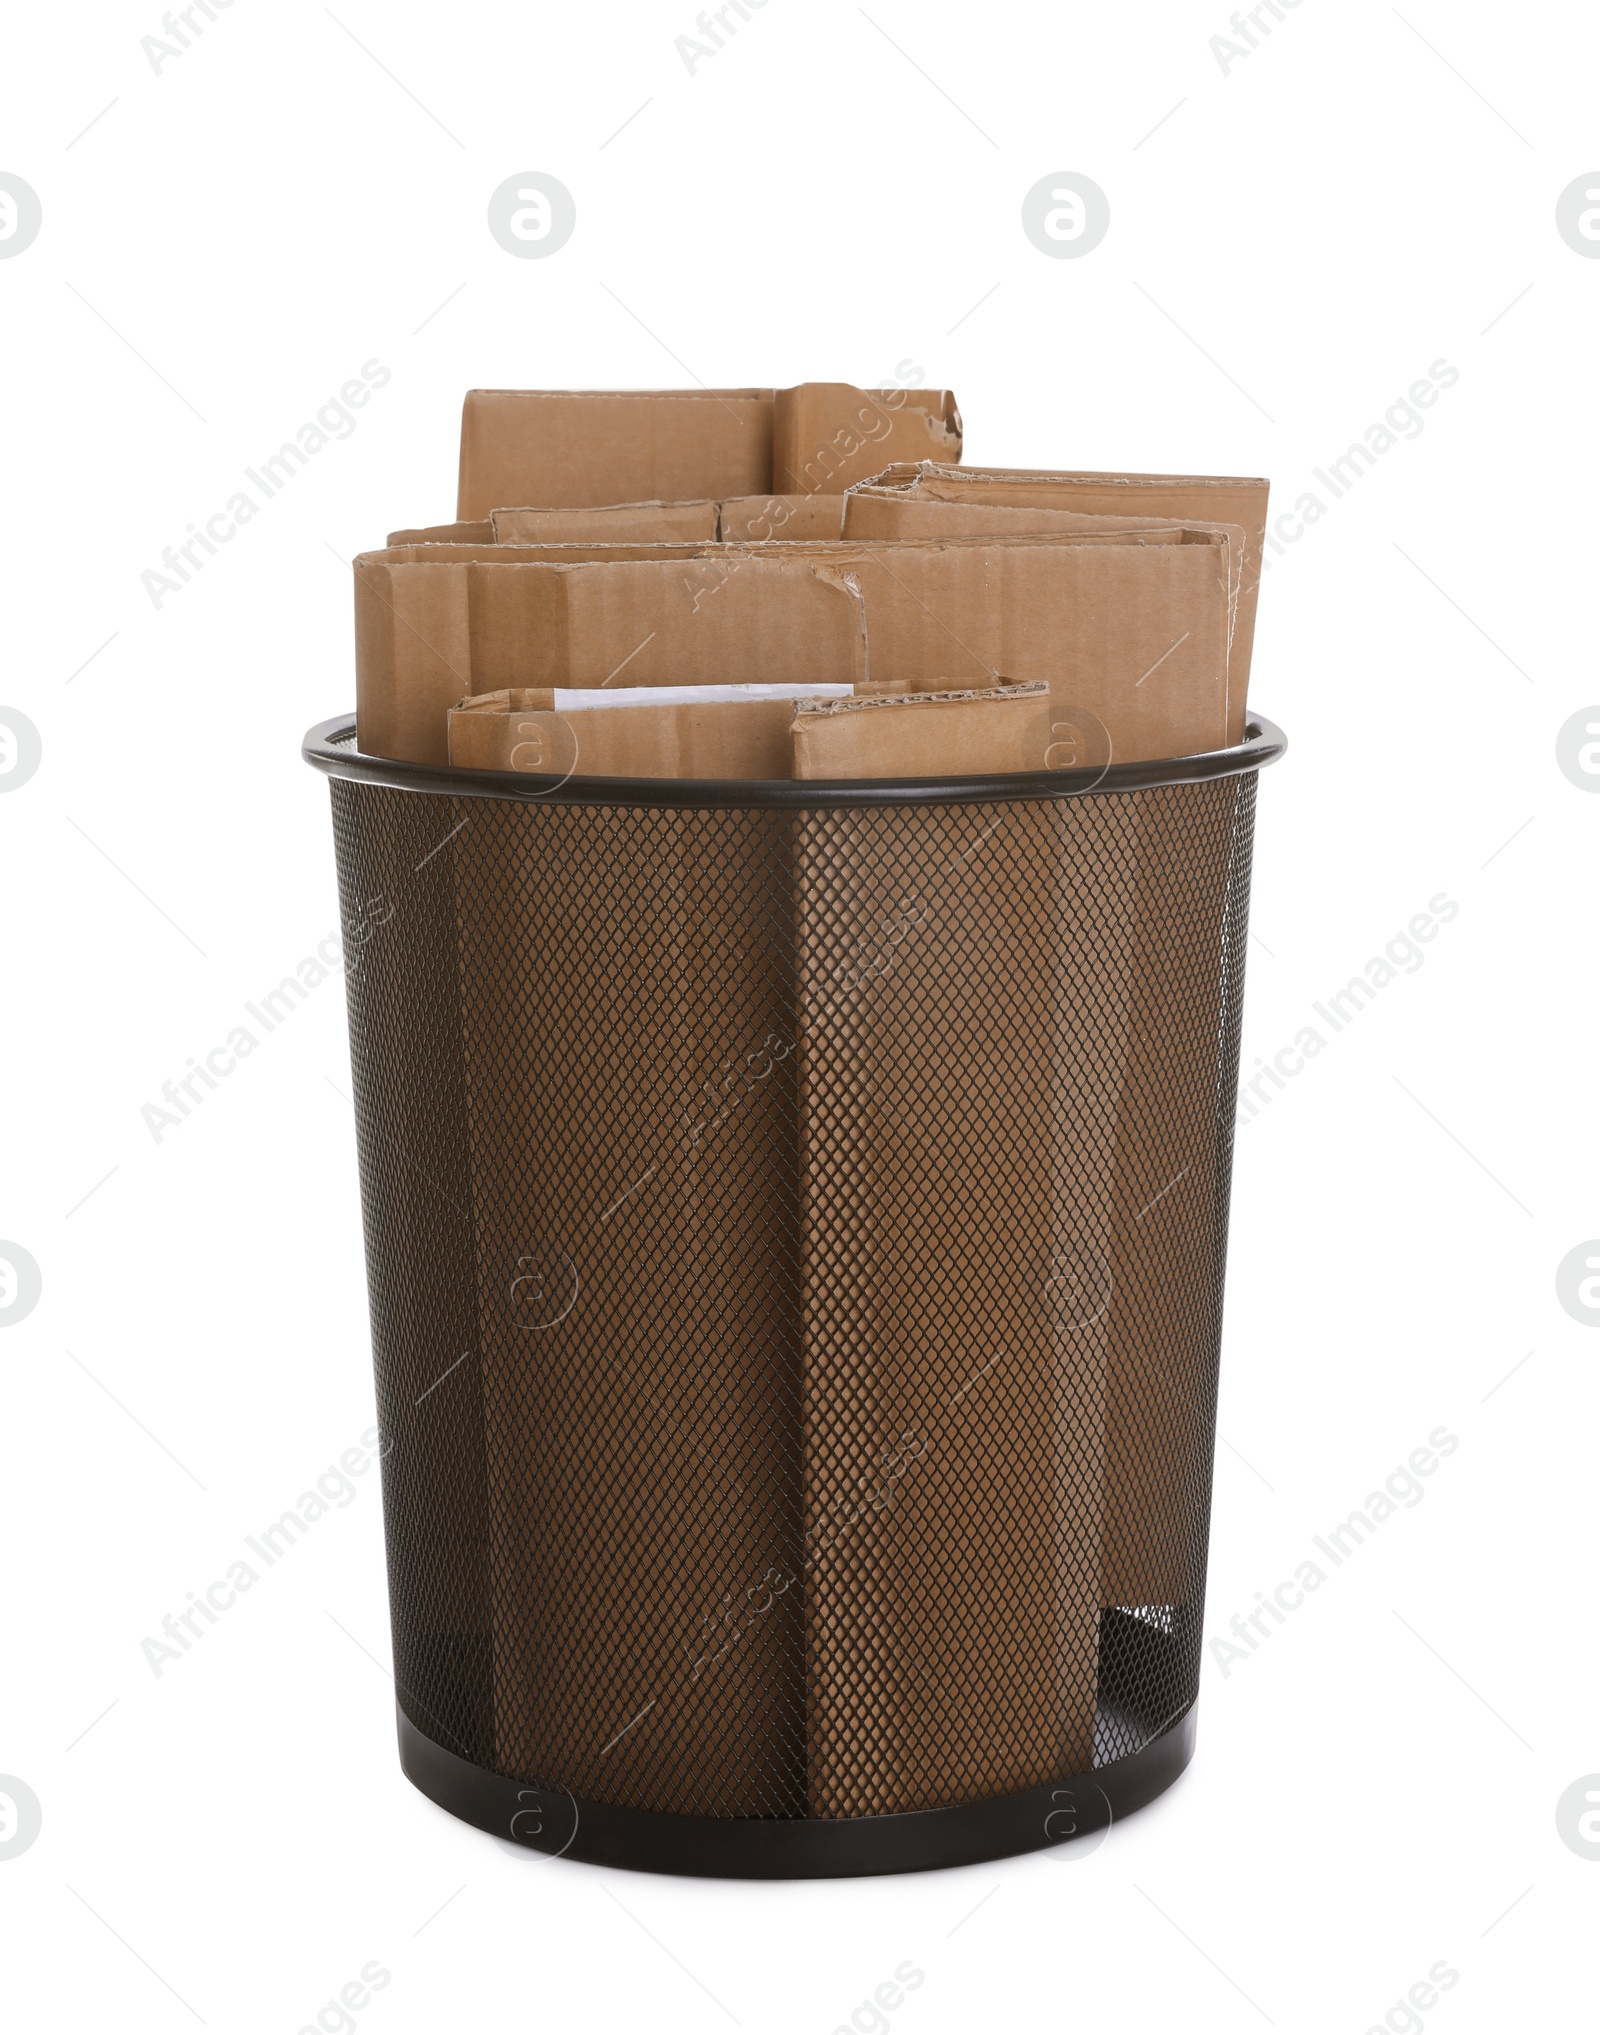 Photo of Trash bin full of cardboard on white background. Recycling rubbish